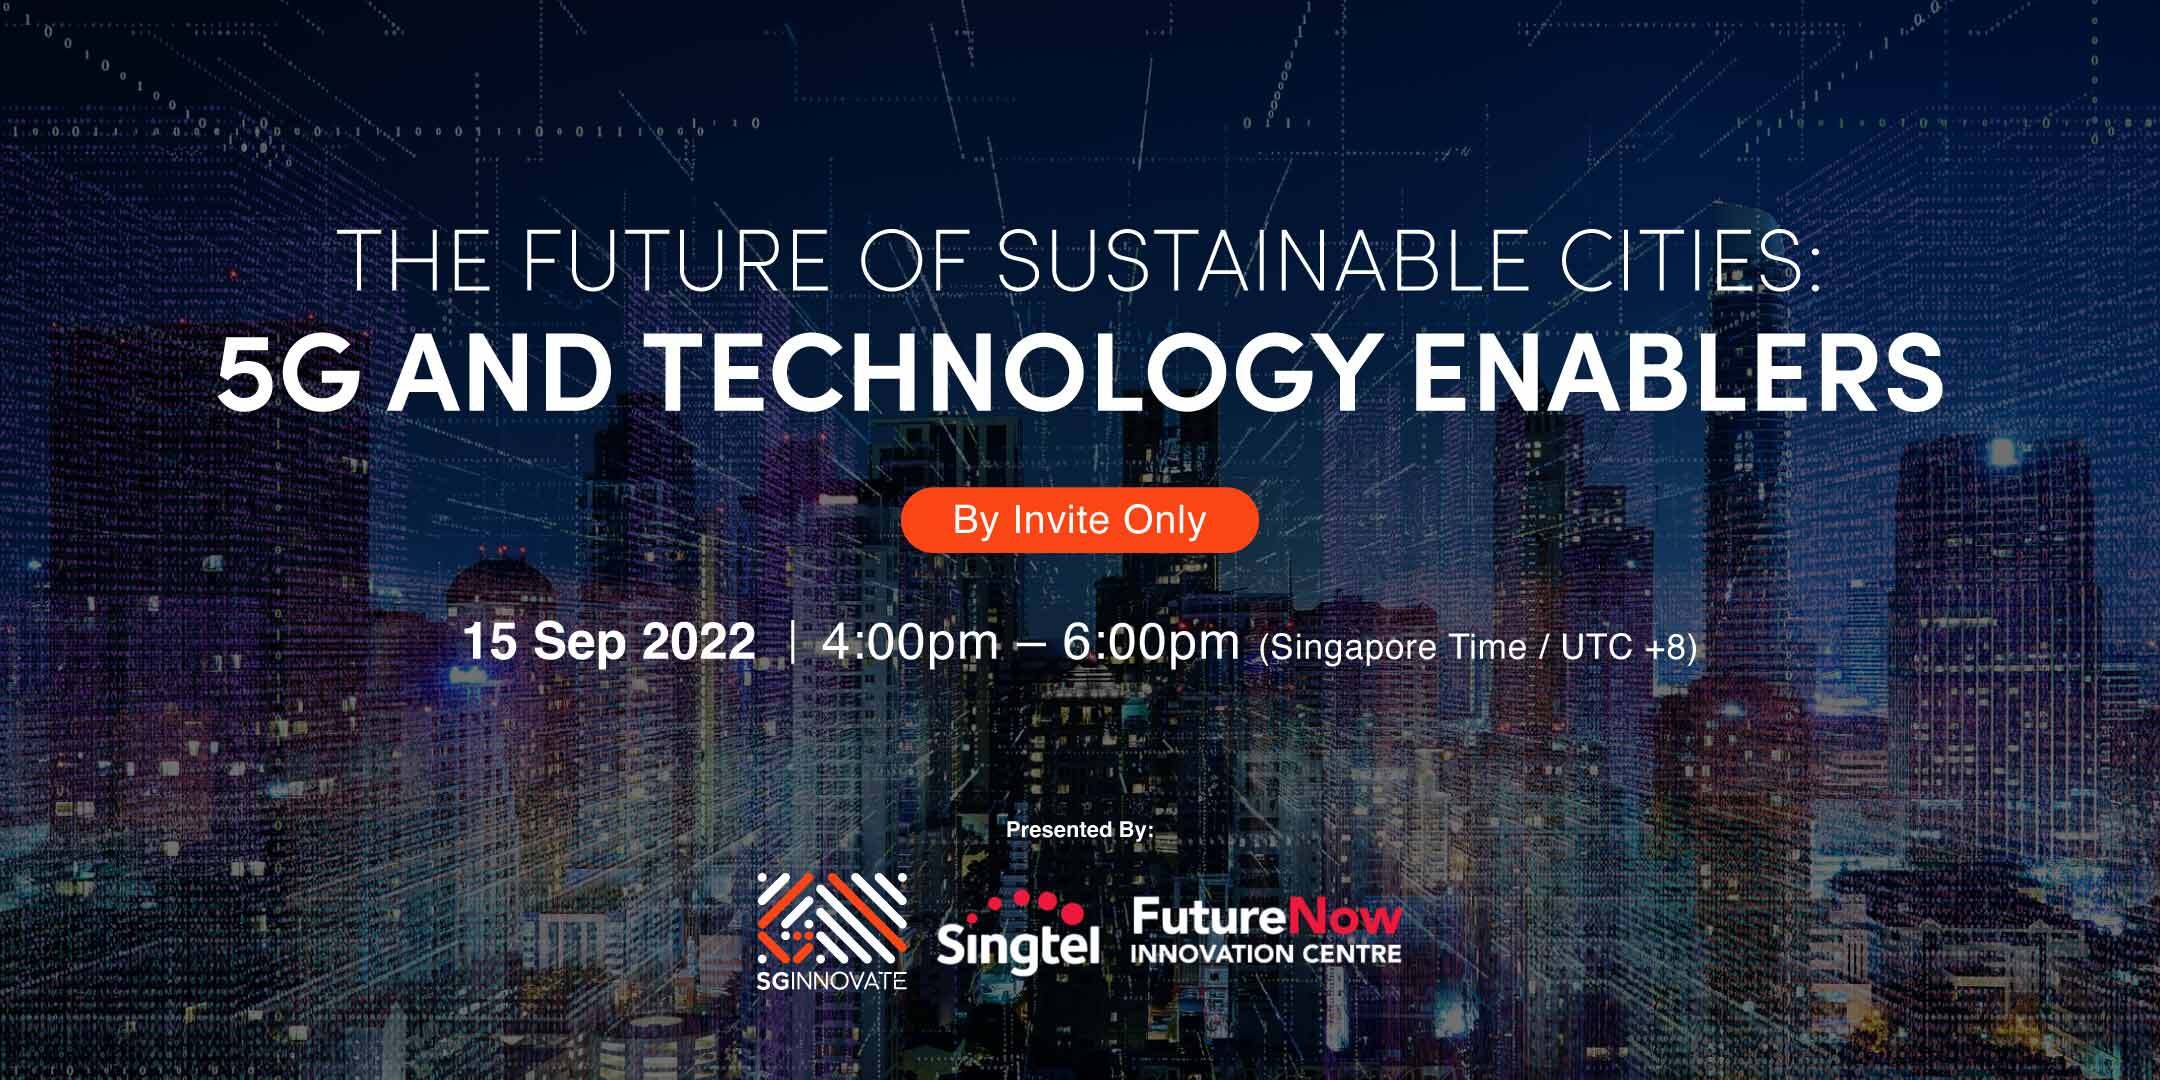 The Future of Sustainable Cities: 5G and Technology Enablers